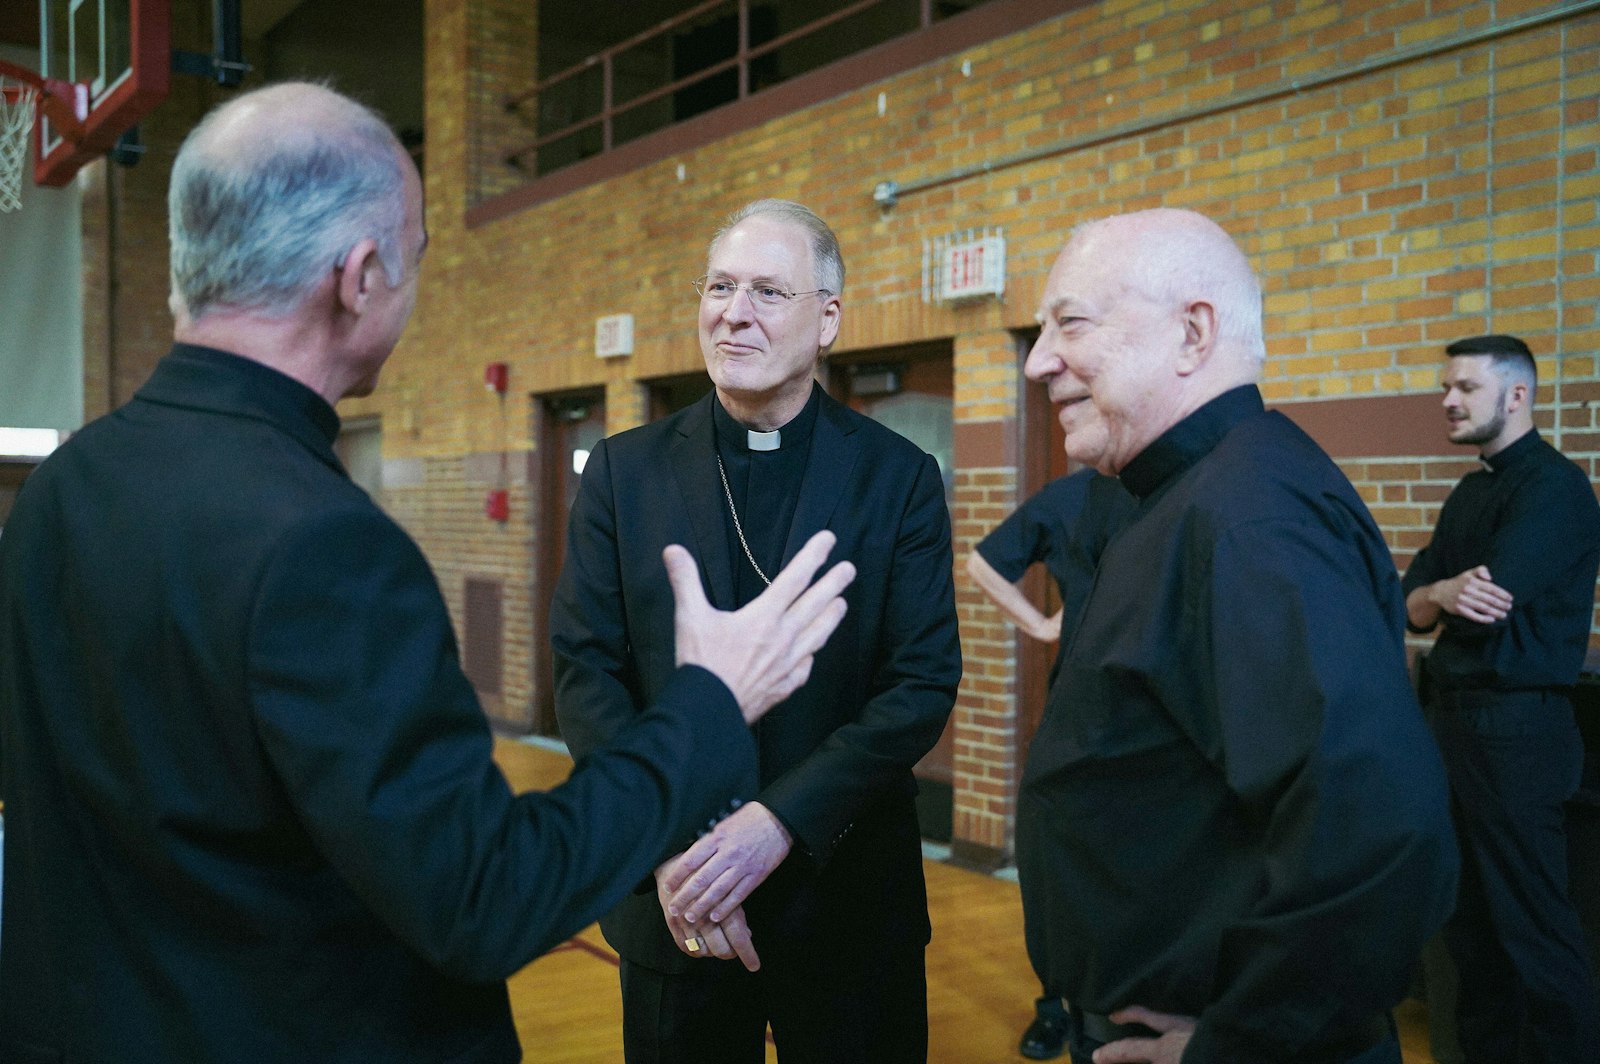 Archbishop Russell speaks with priests of the Archdiocese of Detroit at Sacred Heart Major Seminary after being introduced as Detroit's newest auxiliary bishop. Over the years, Archbishop Russell has developed friendships with a number of Detroit priests, having returned to Michigan often during his travels to care for his family back home.